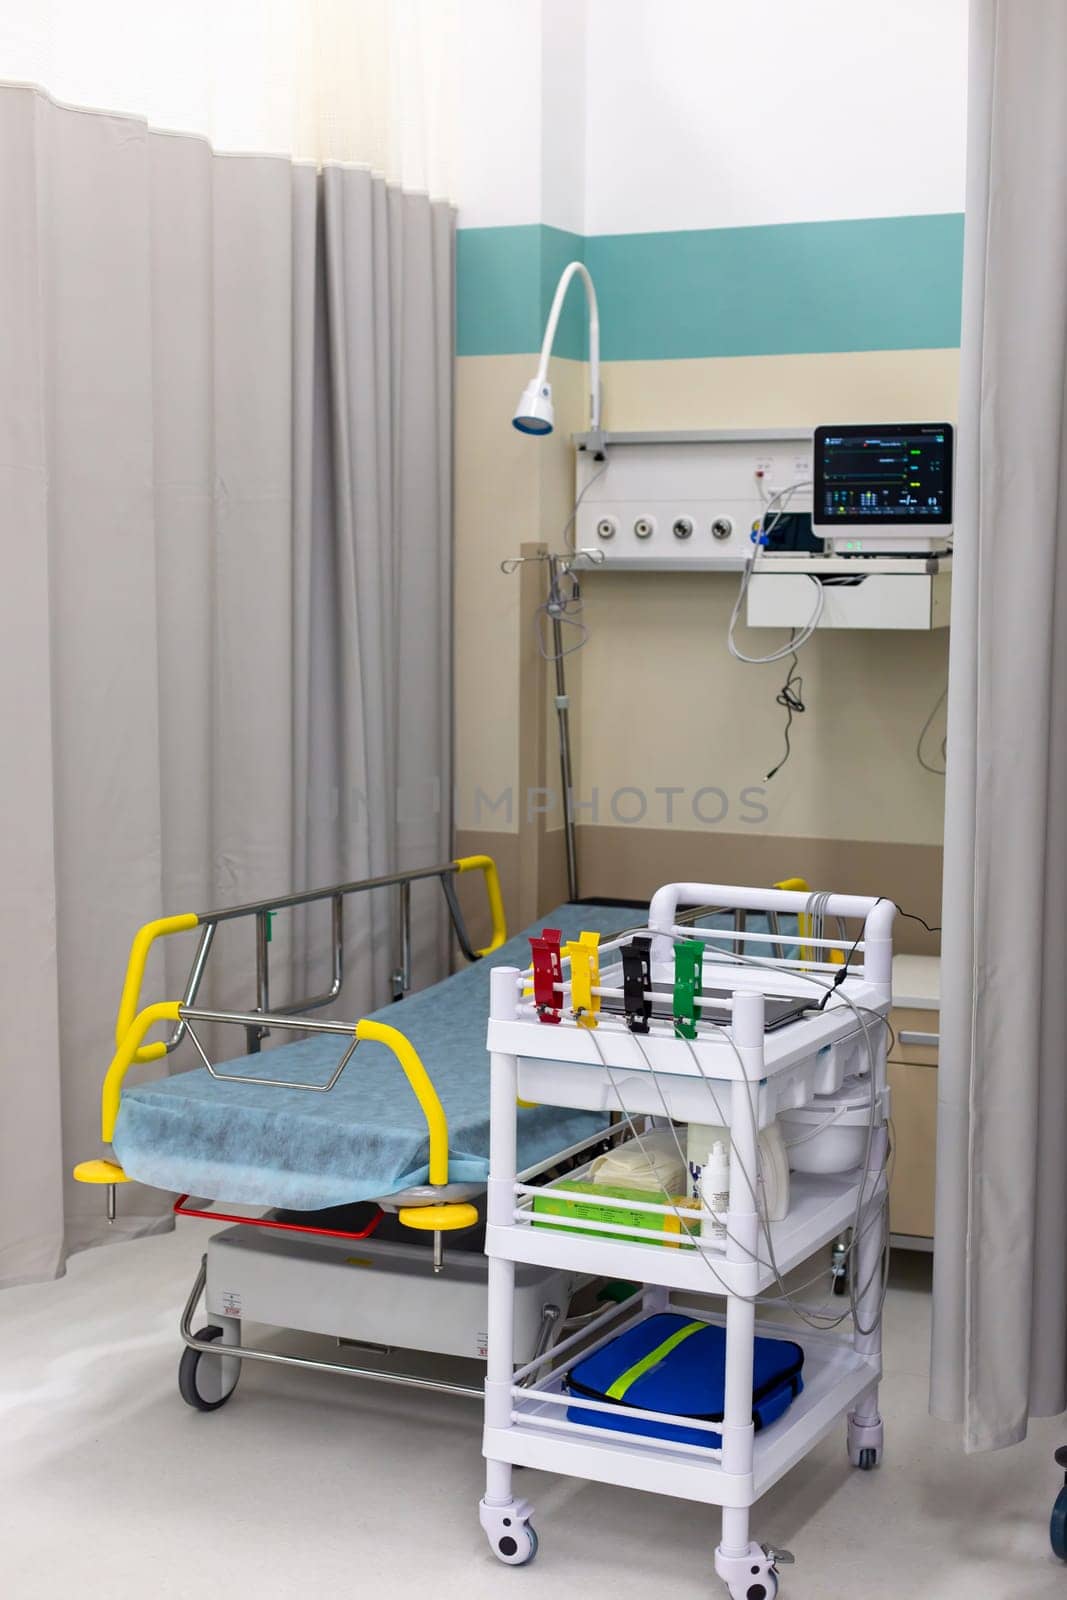 Hospital room setup with an empty patient bed, a medical trolley, and a vital signs monitor against a curtained backdrop